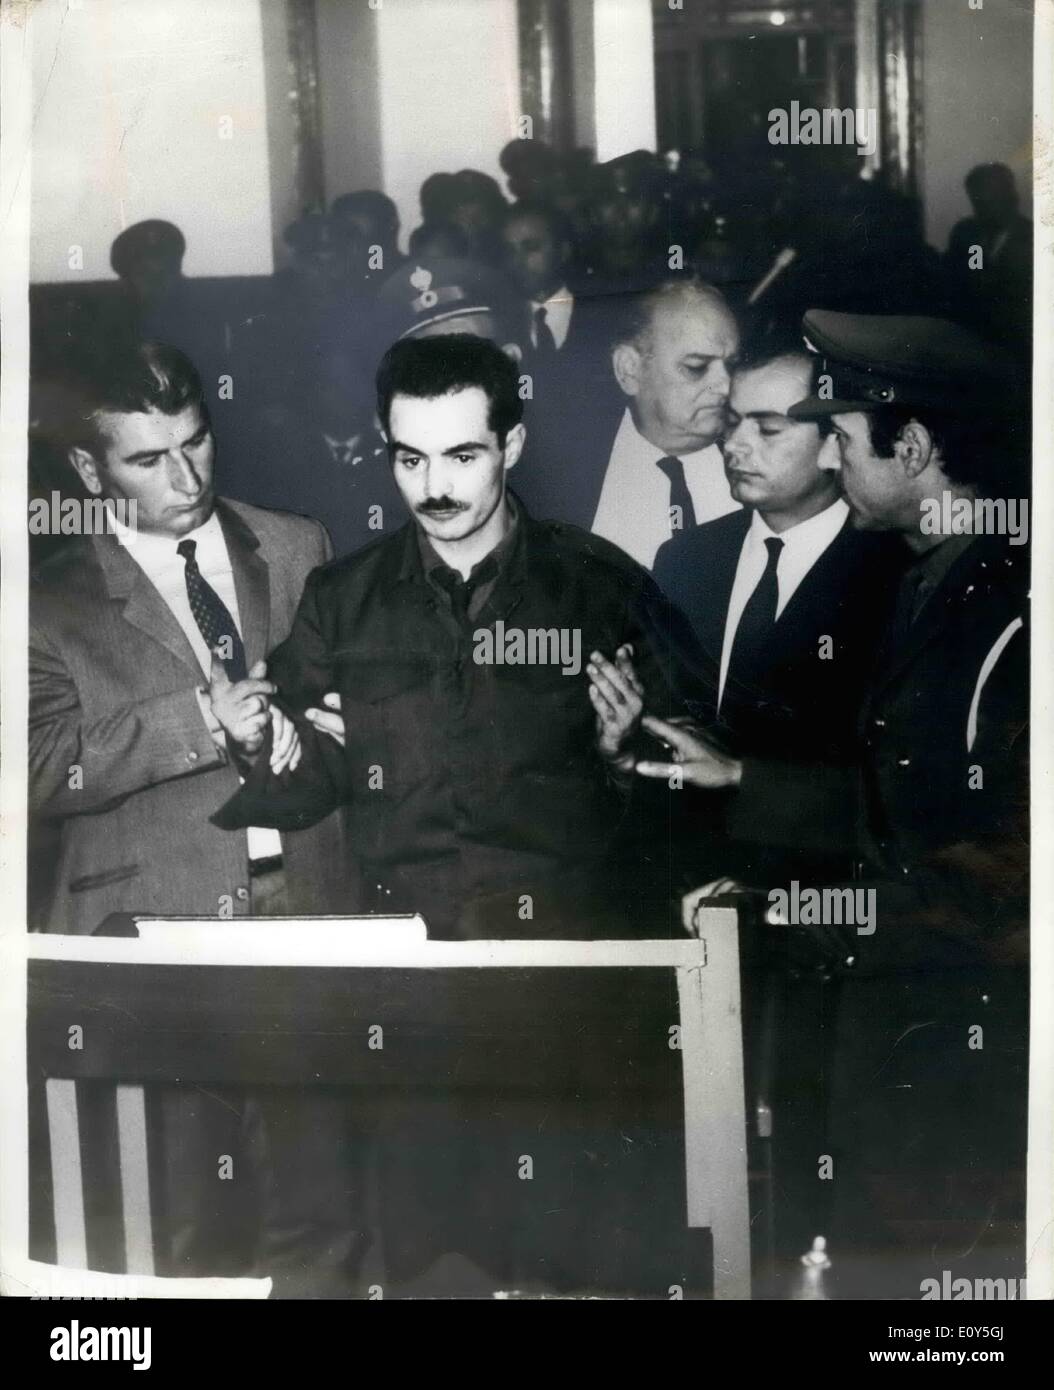 Nov. 11, 1968 - 15 On Bomb PLT Charges In Athens: Alexandros Paragoulis, accused of being the leader of a plot to assassinate Mr. Papadopoulos, the Greek Prime Minister, told a court martial, which opened in Athens on Nov. 4, that he had been tortured ''on the lines of the Spanish Inquisition'' during 82 days detention. On trial with Panagoulis, were 14 youths said to have helped him in the abortive bomb attempt on Aug. 13 Stock Photo